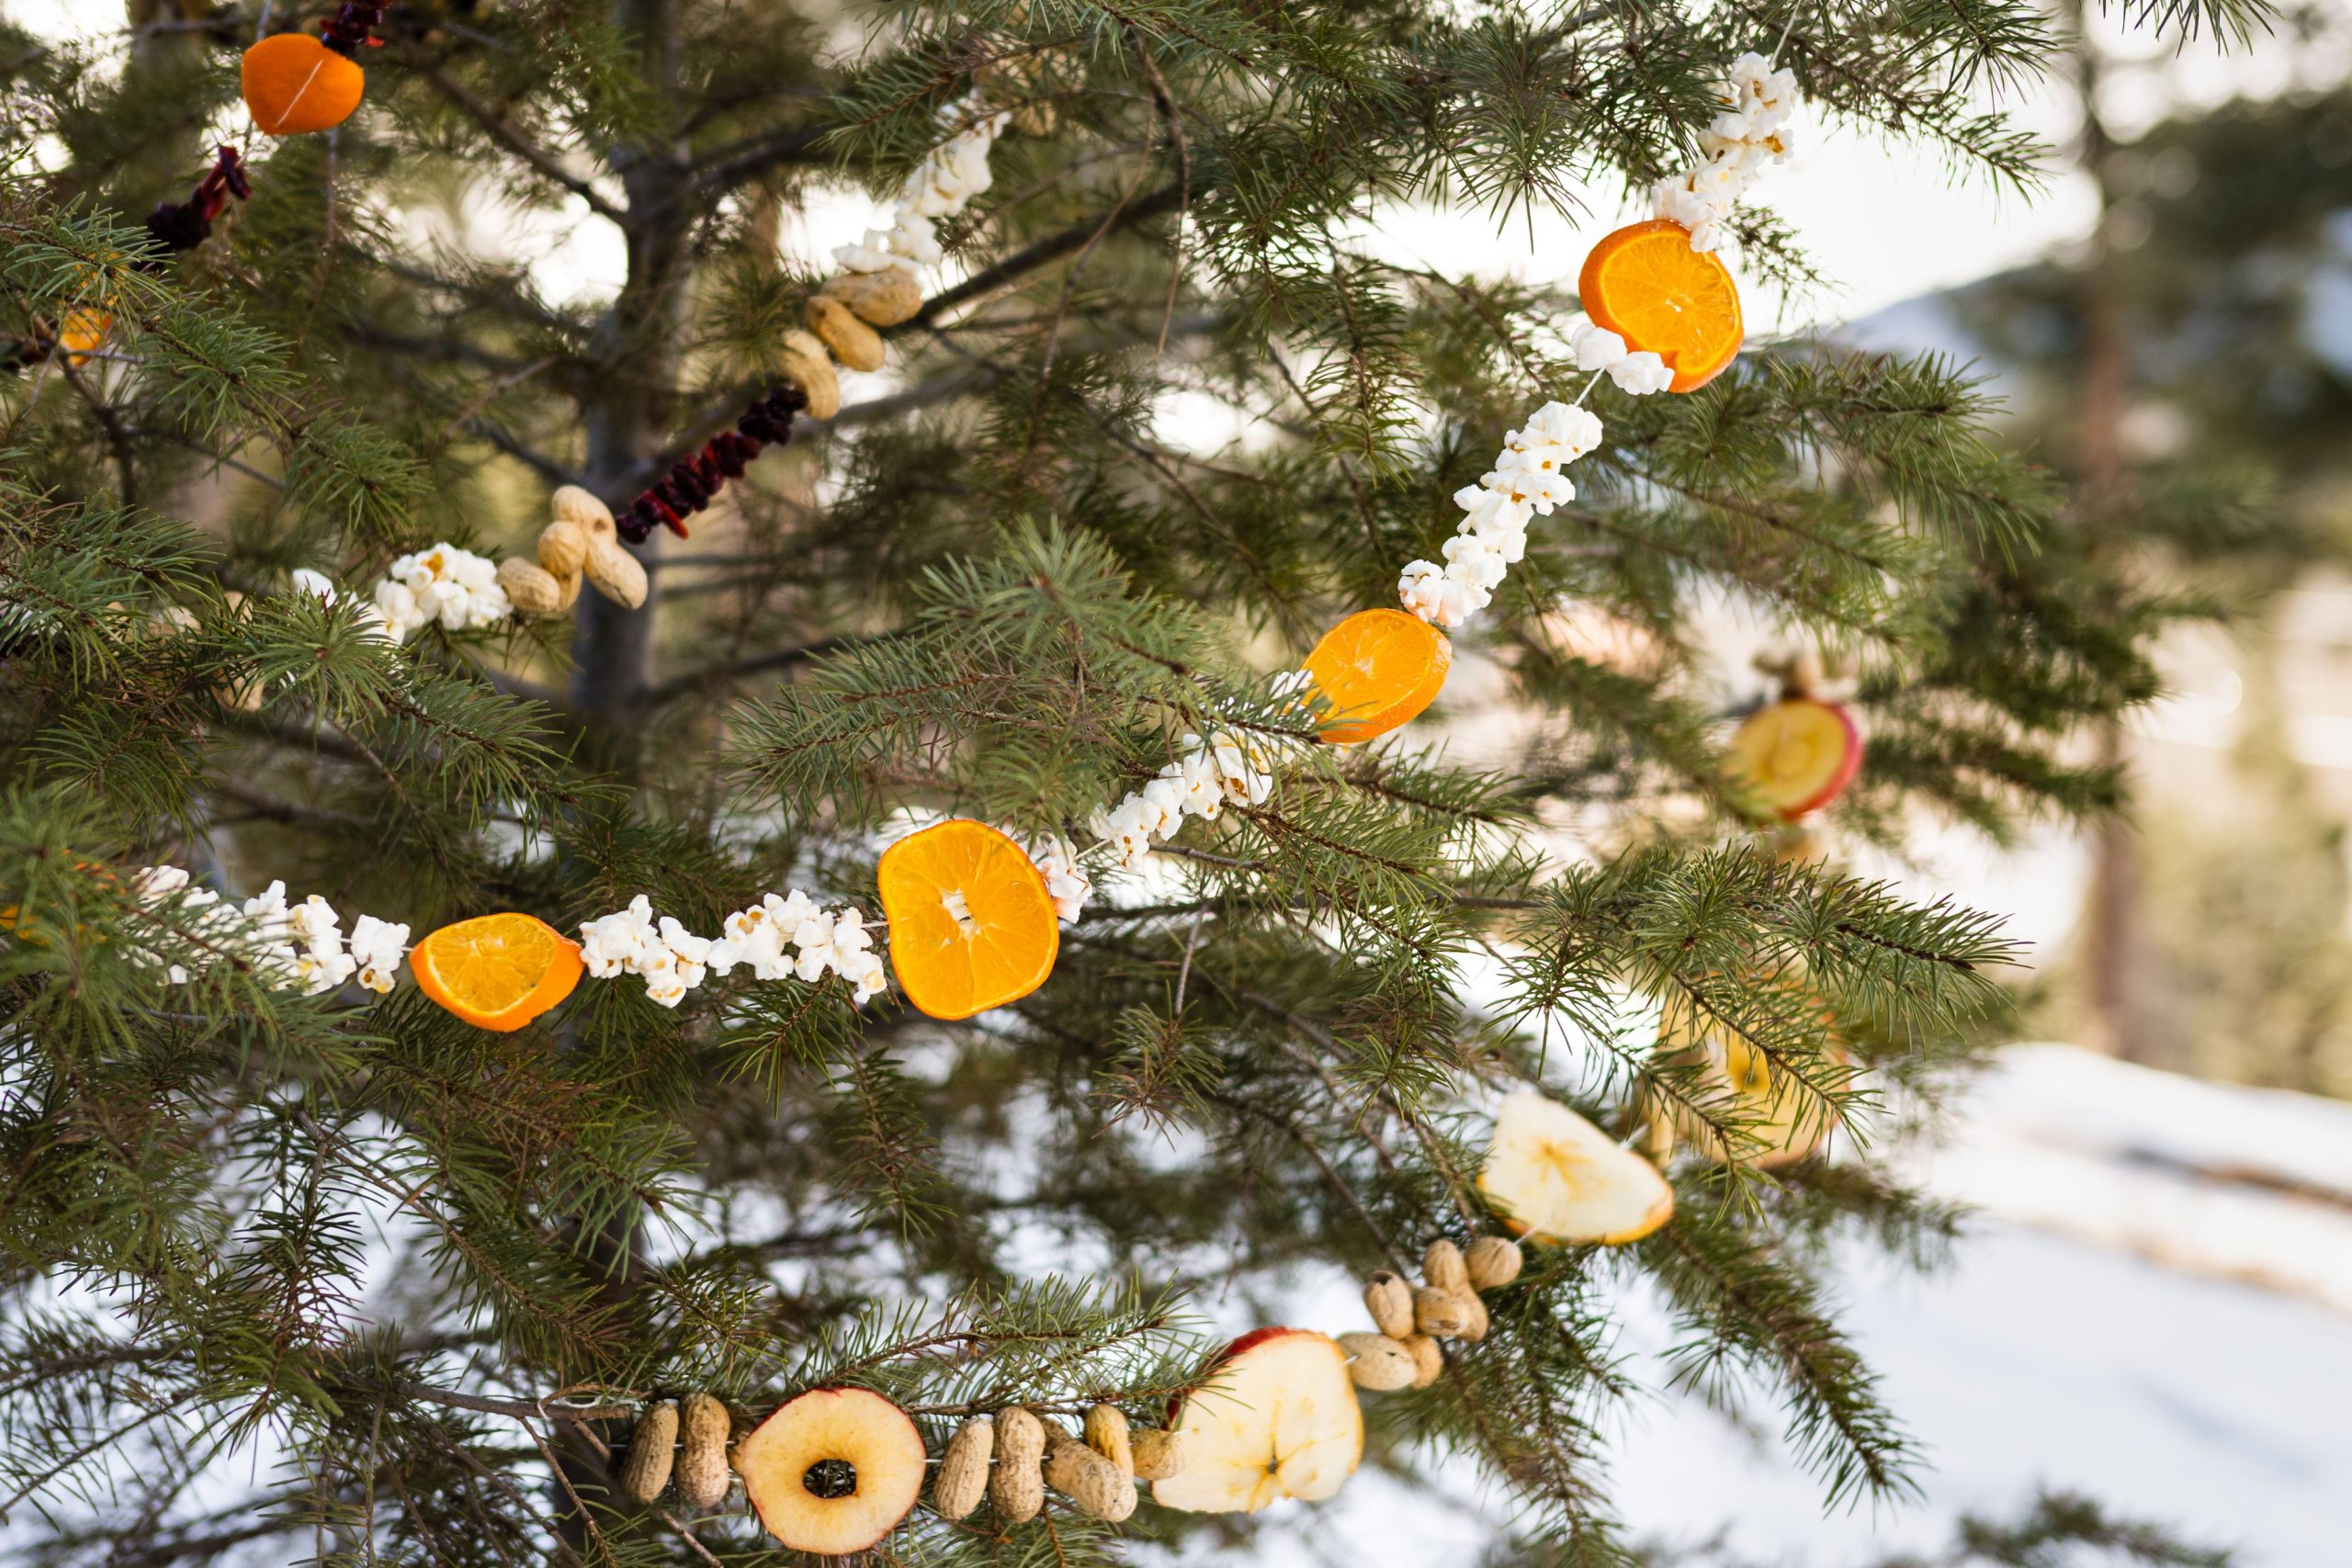 A bird feeder garland made with fruit and nuts and hung on an evergreen tree